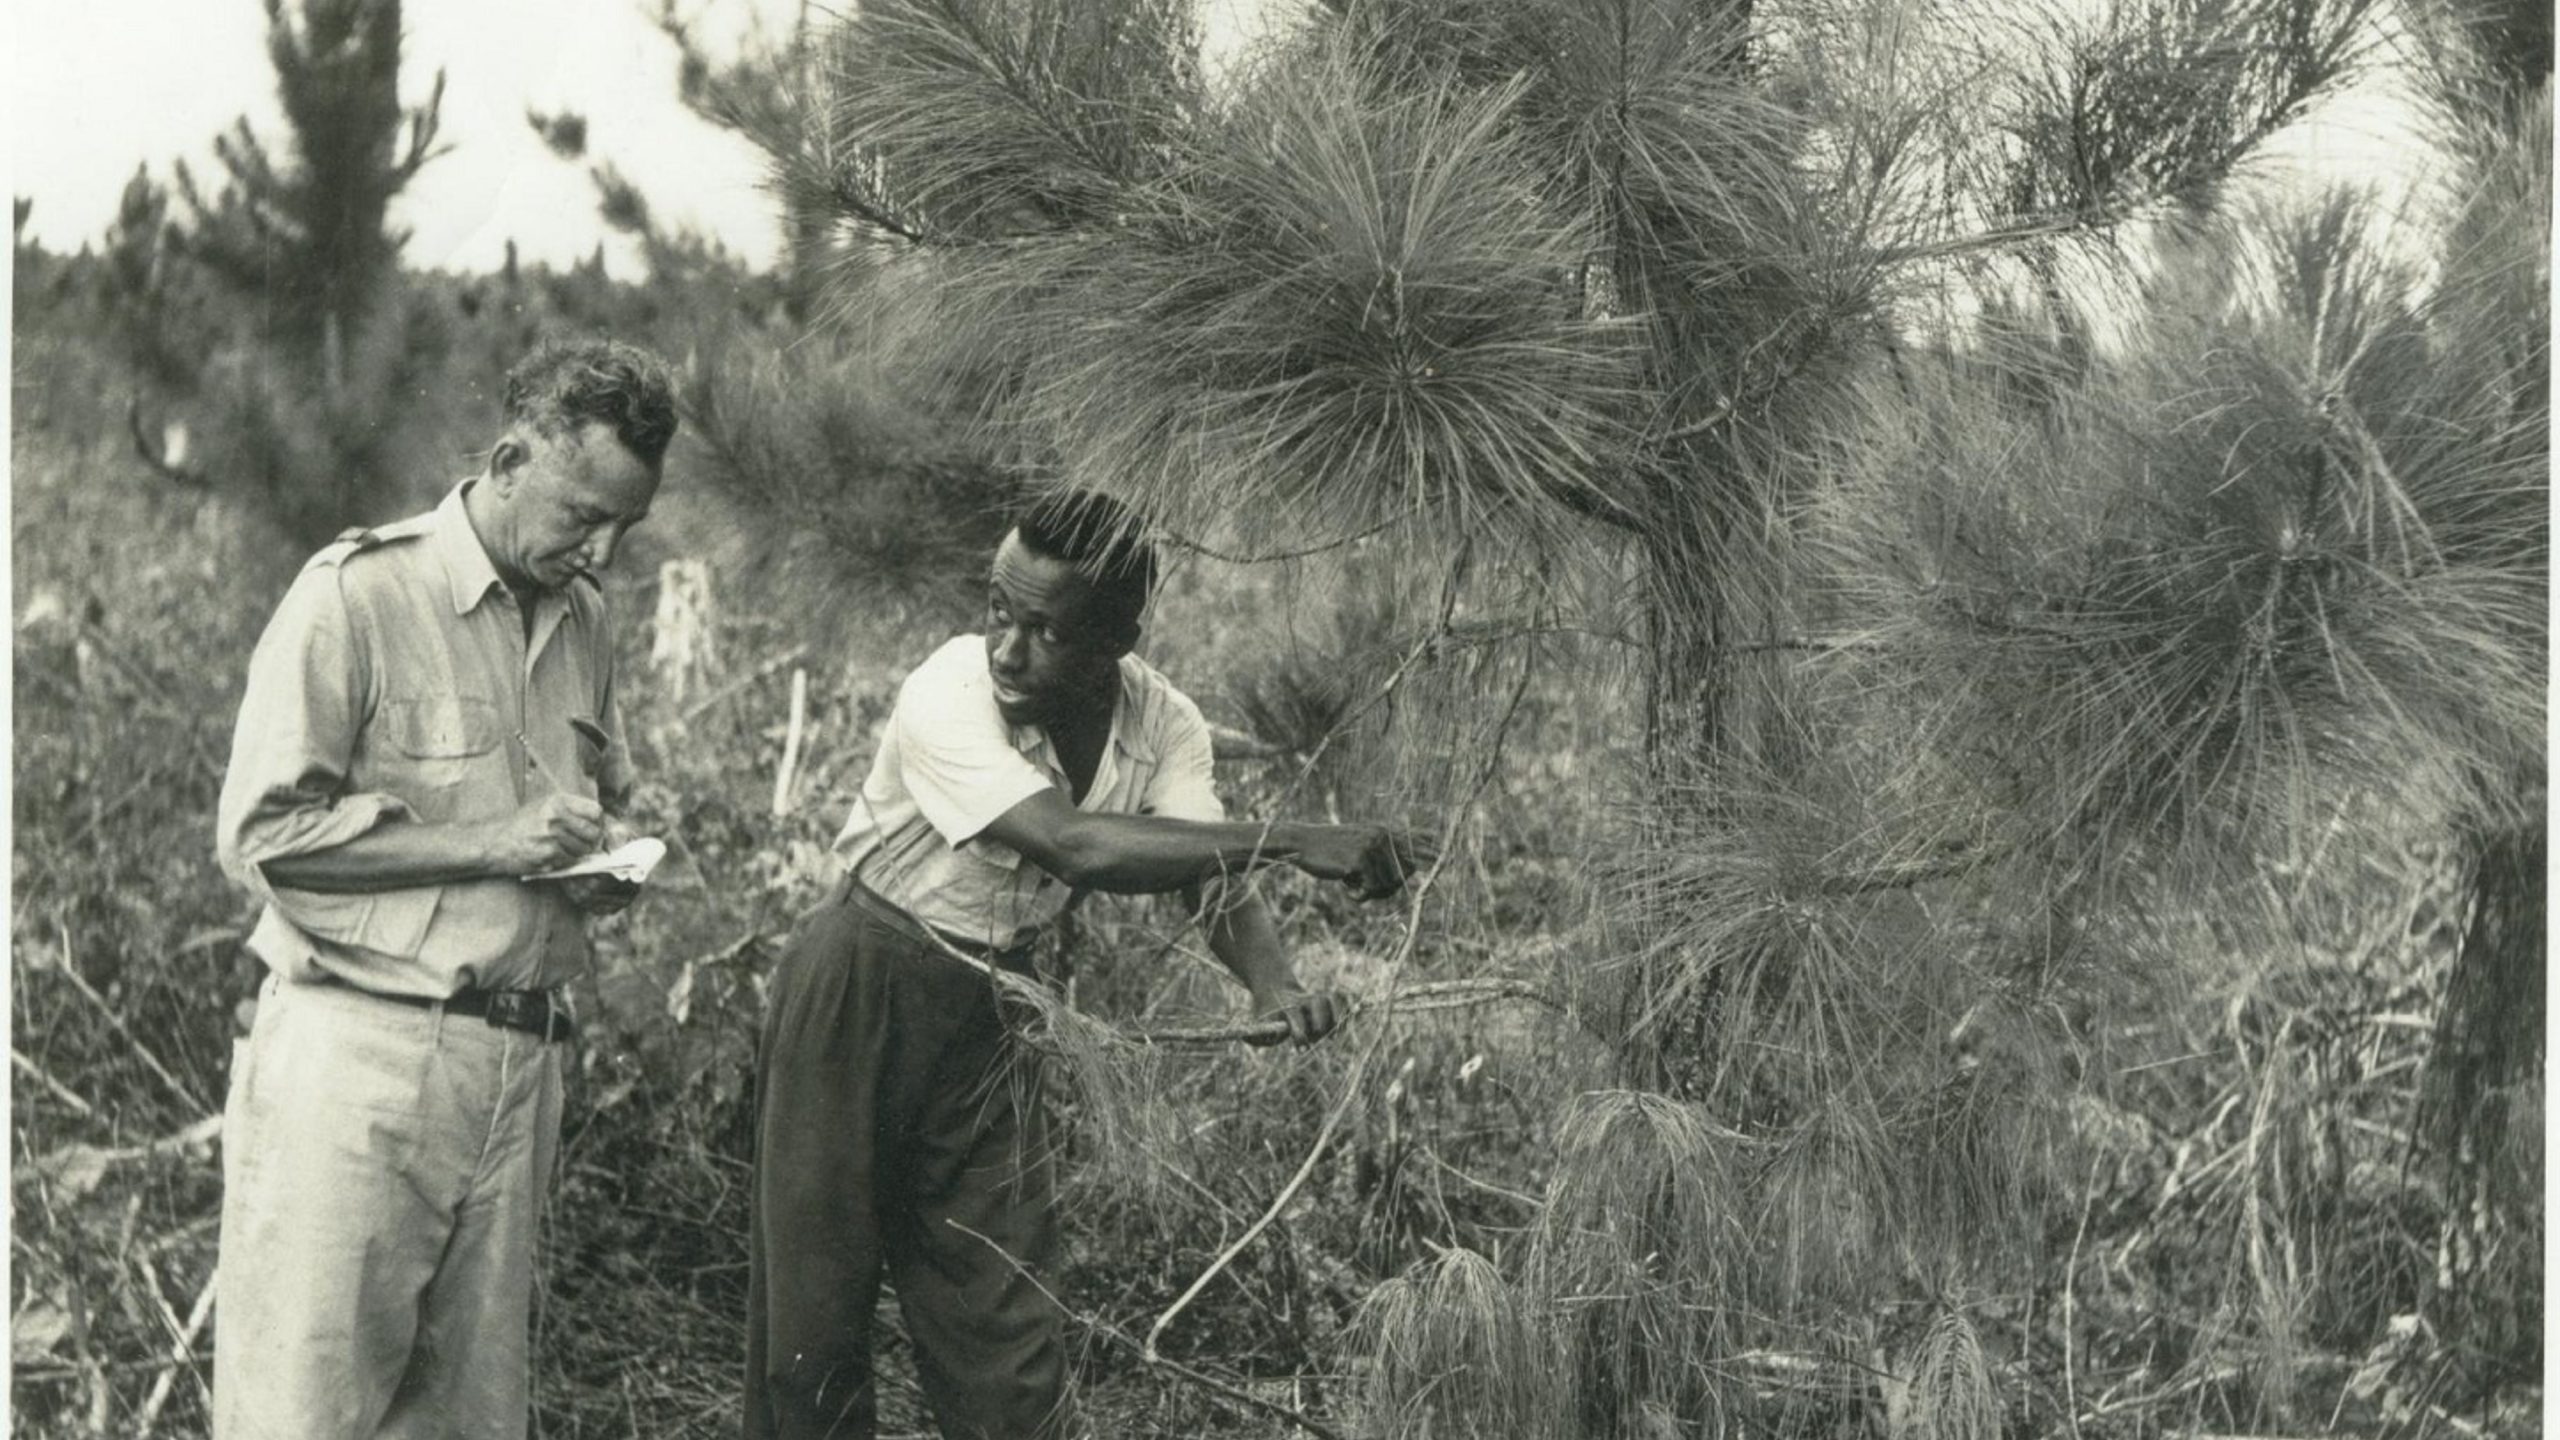 Photo: Belizean forestry worker with British forester in a pine plantation. Decolonising our research requires us to understand the historical context of the place we are working. Credit: Belize Archives and Records Service